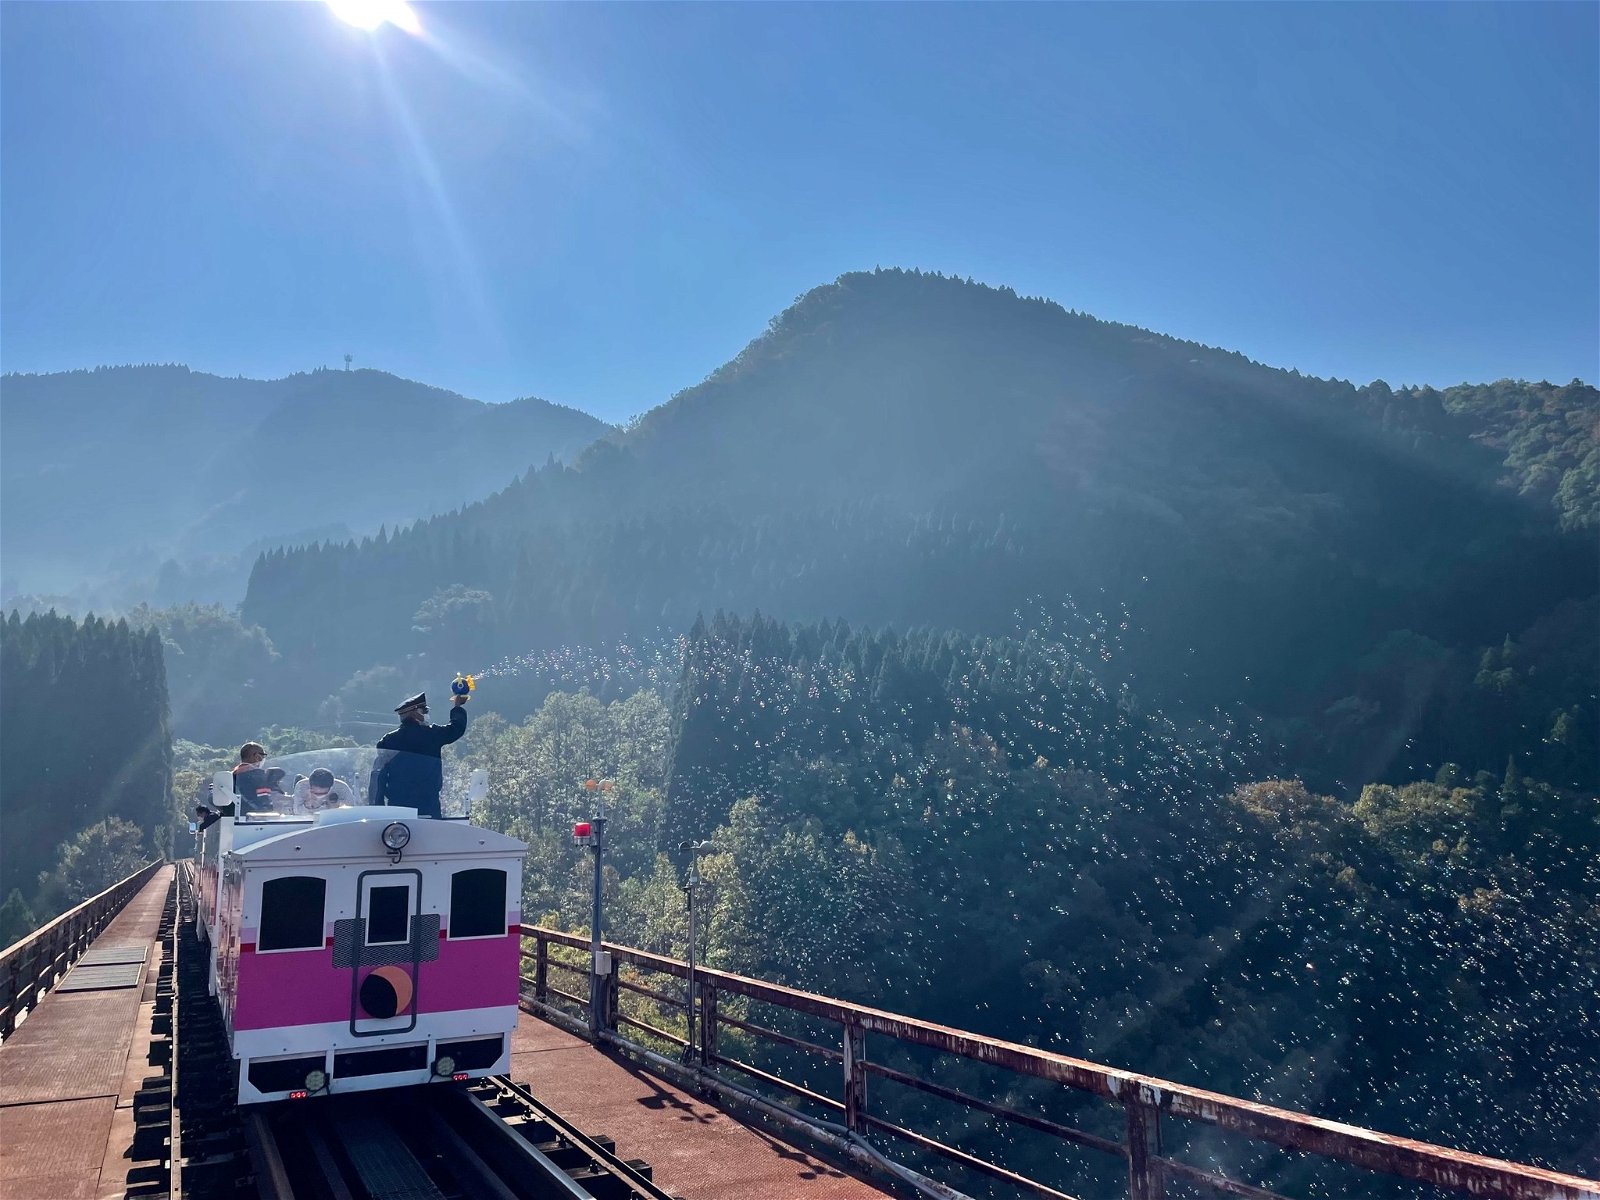 Conductor blows bubbles on Amaterasu Railway in Japan. Giant, beautiful mountains are in the distance.